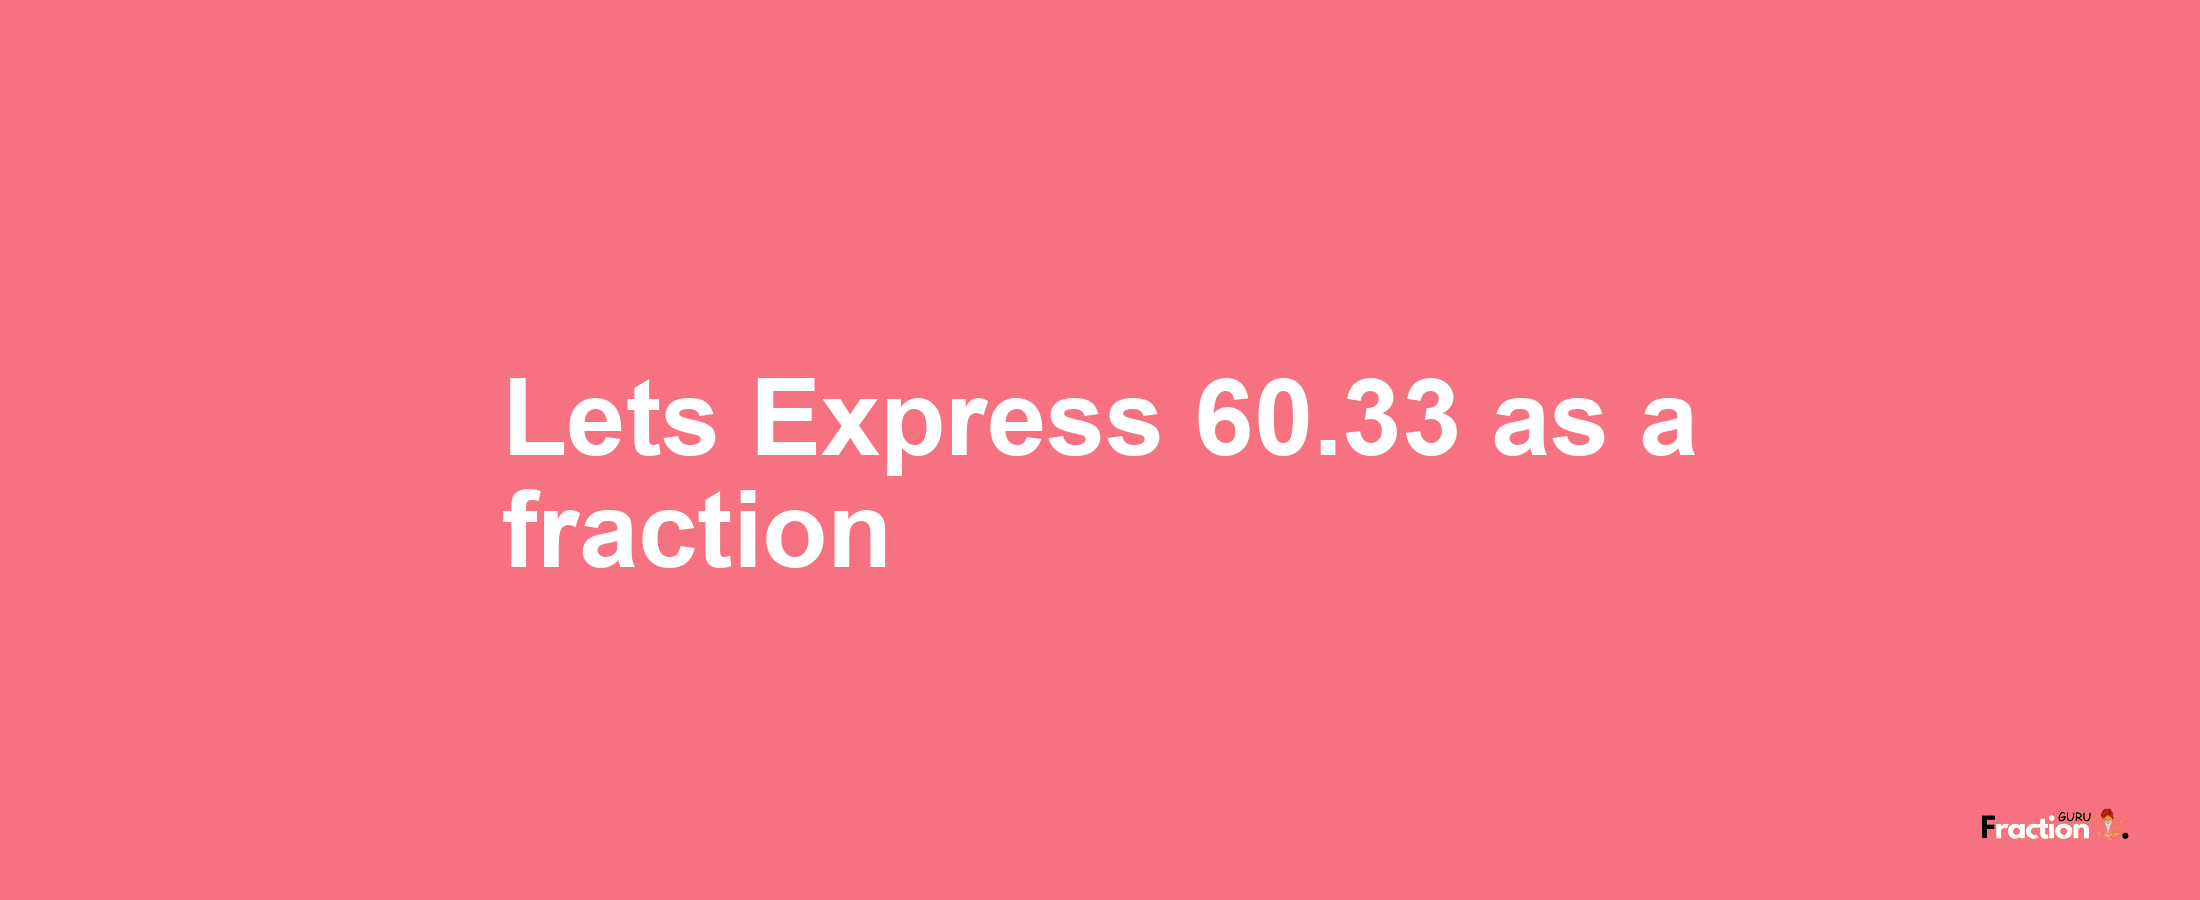 Lets Express 60.33 as afraction